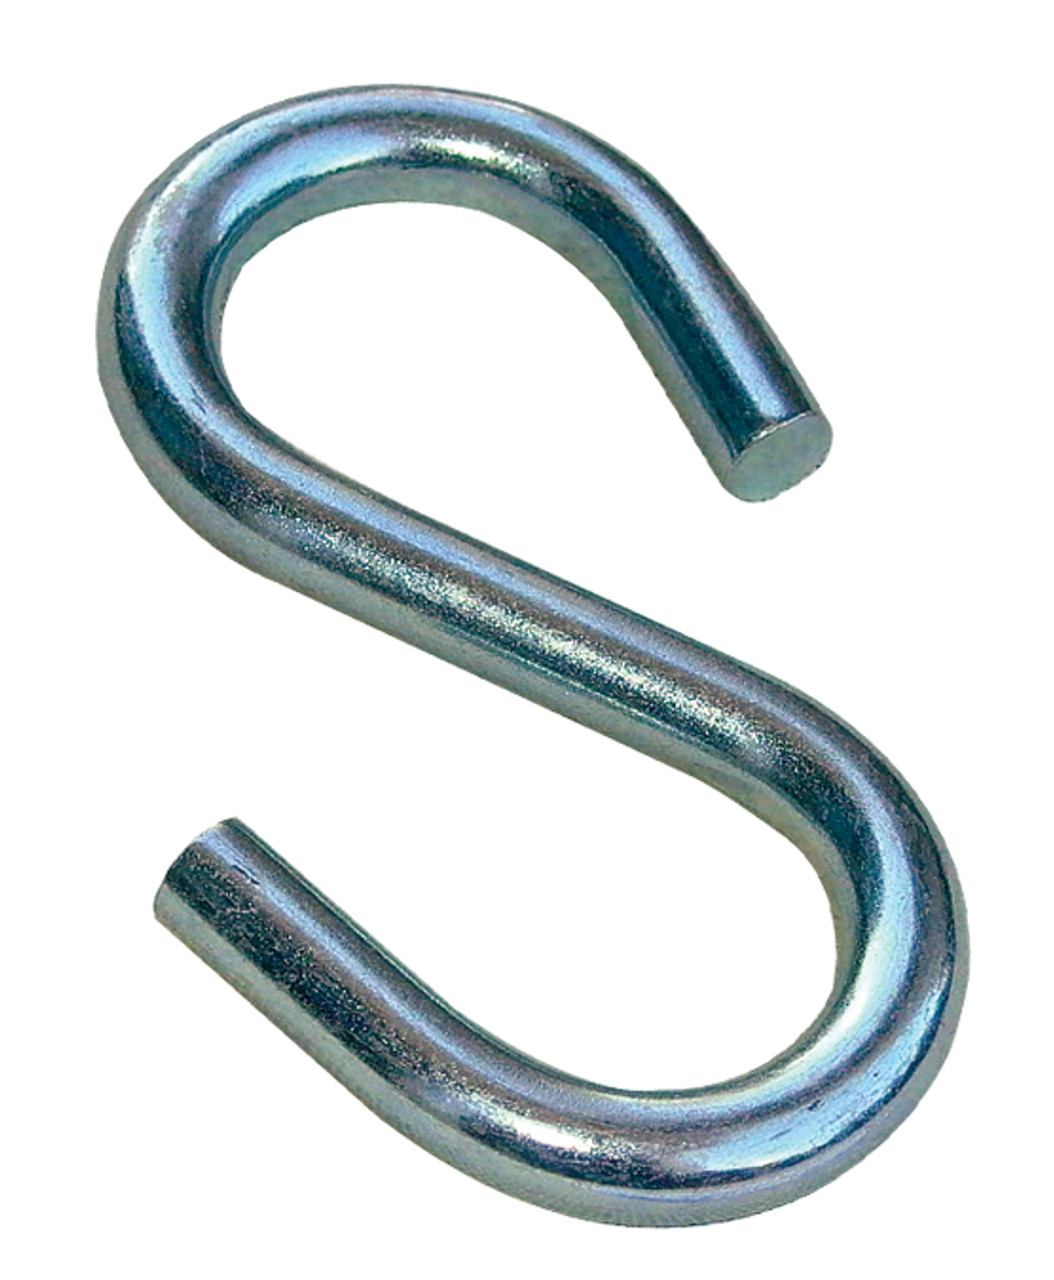 Commercial Standard S-Hook 5/16 x 3 USA Made 